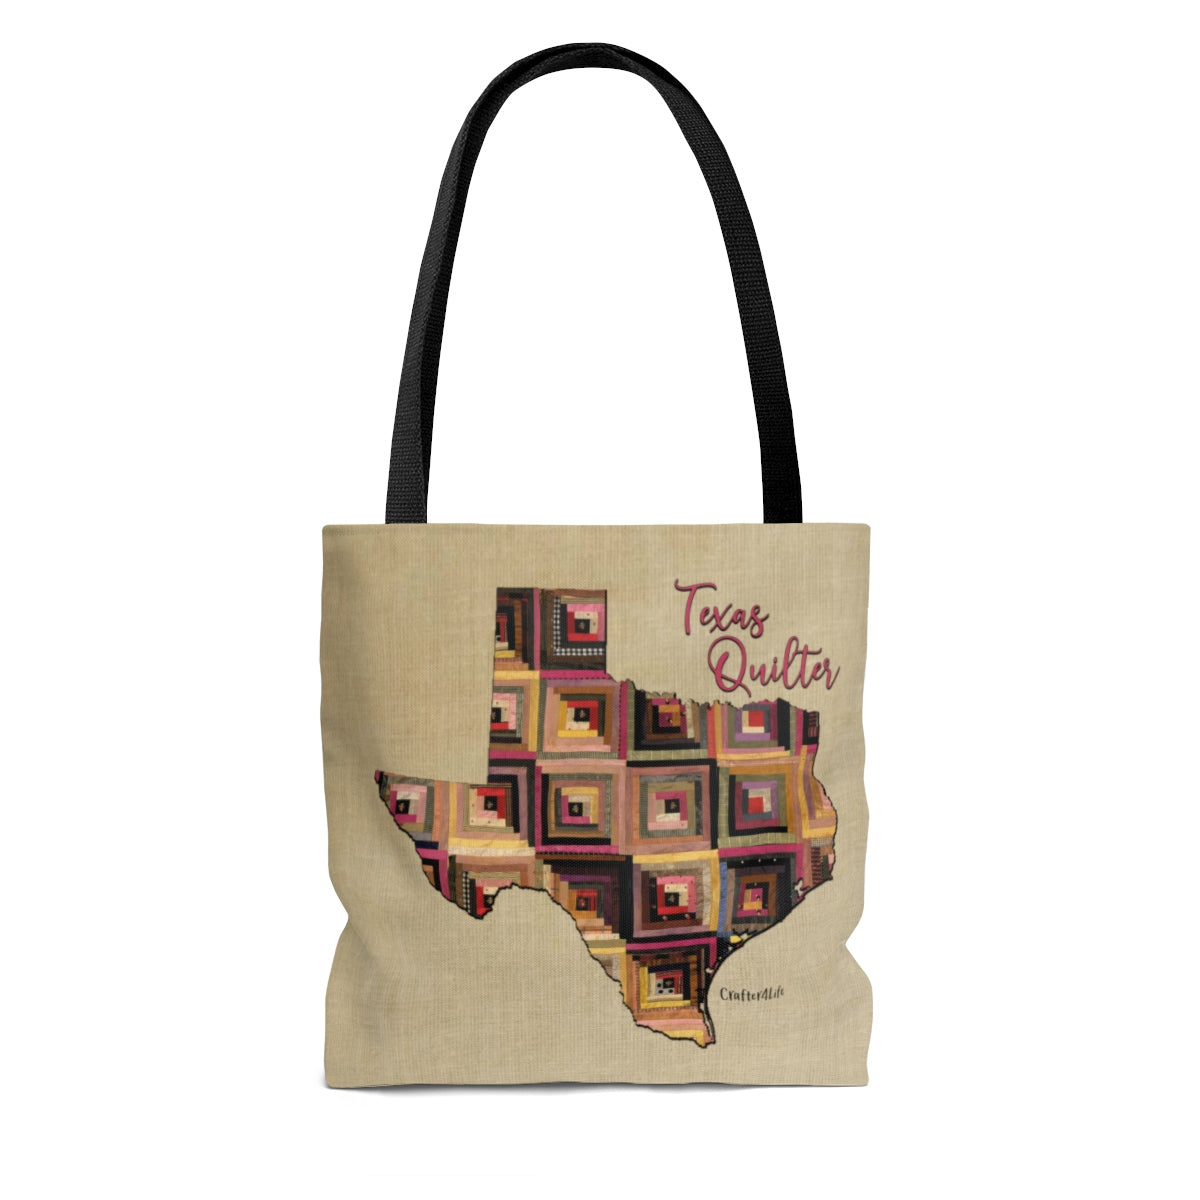 Texas Quilter Cloth Tote Bag